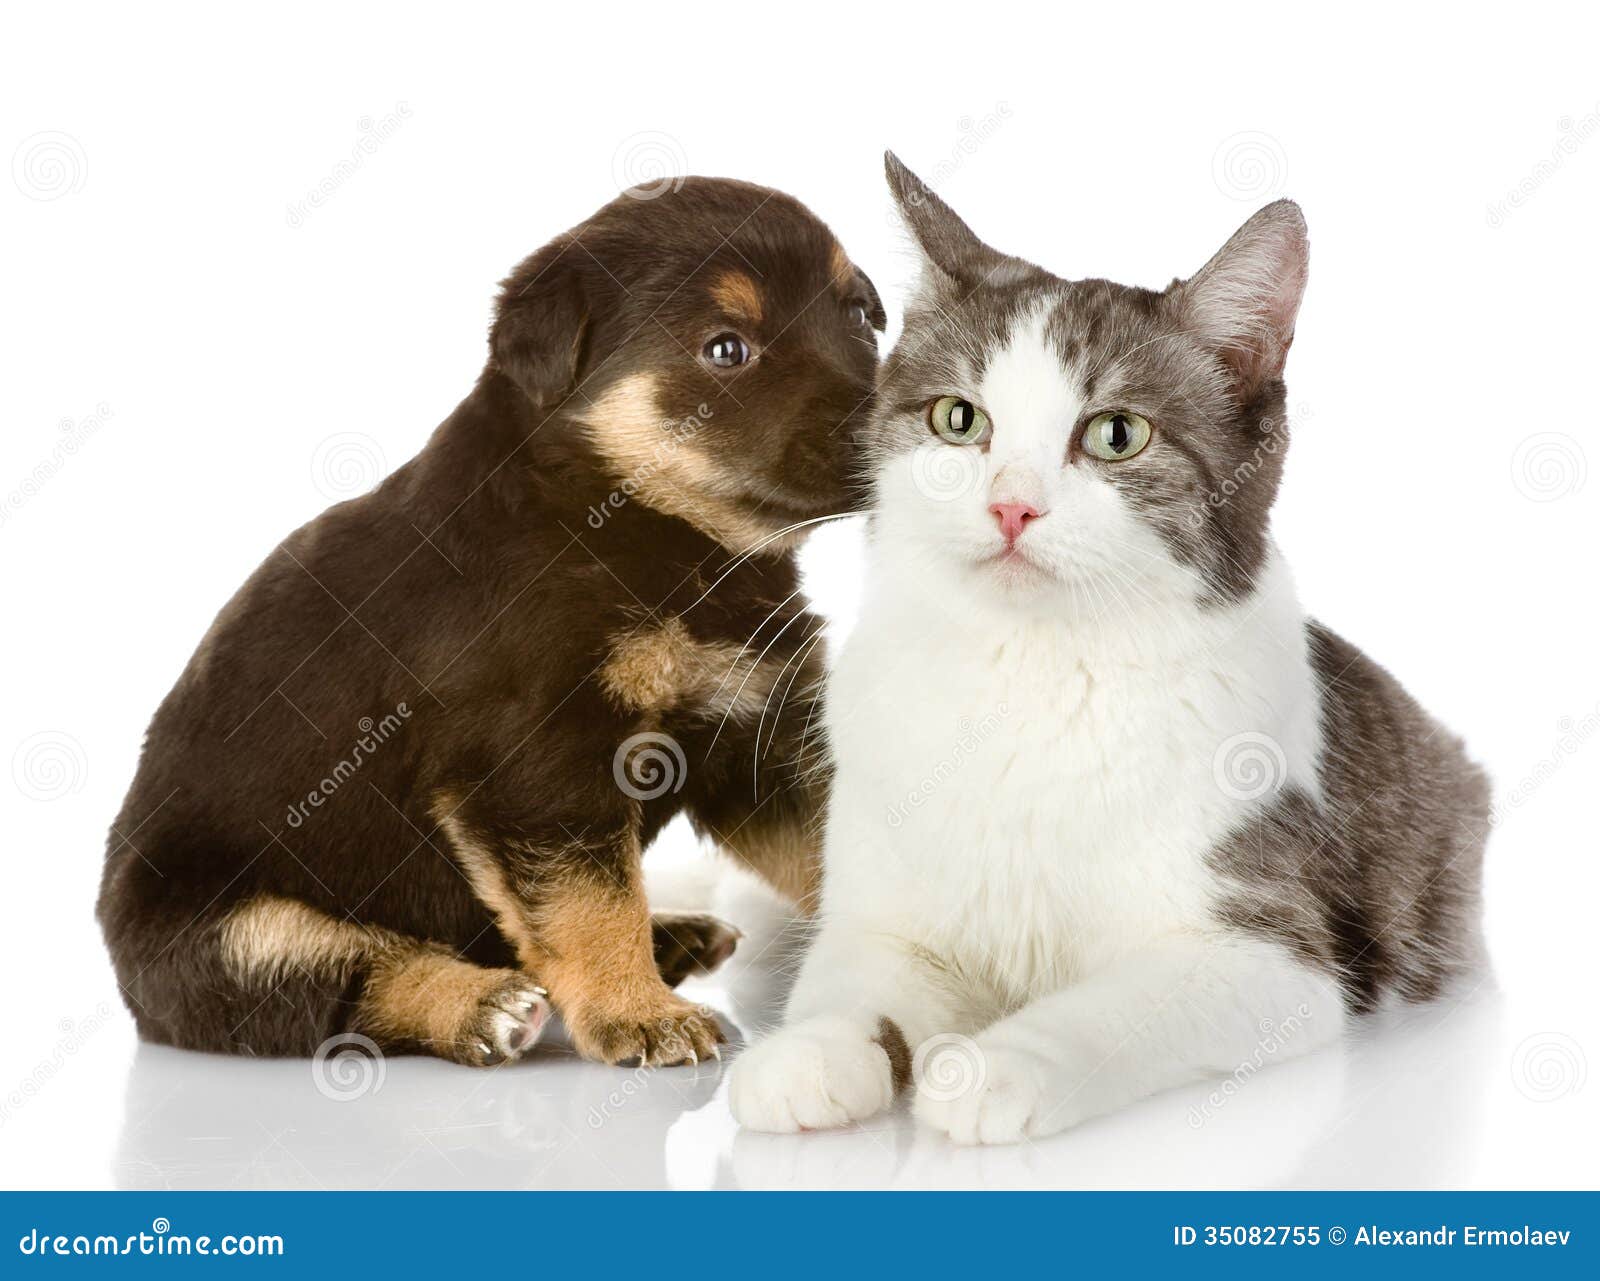 free clipart of dog and cat together - photo #36